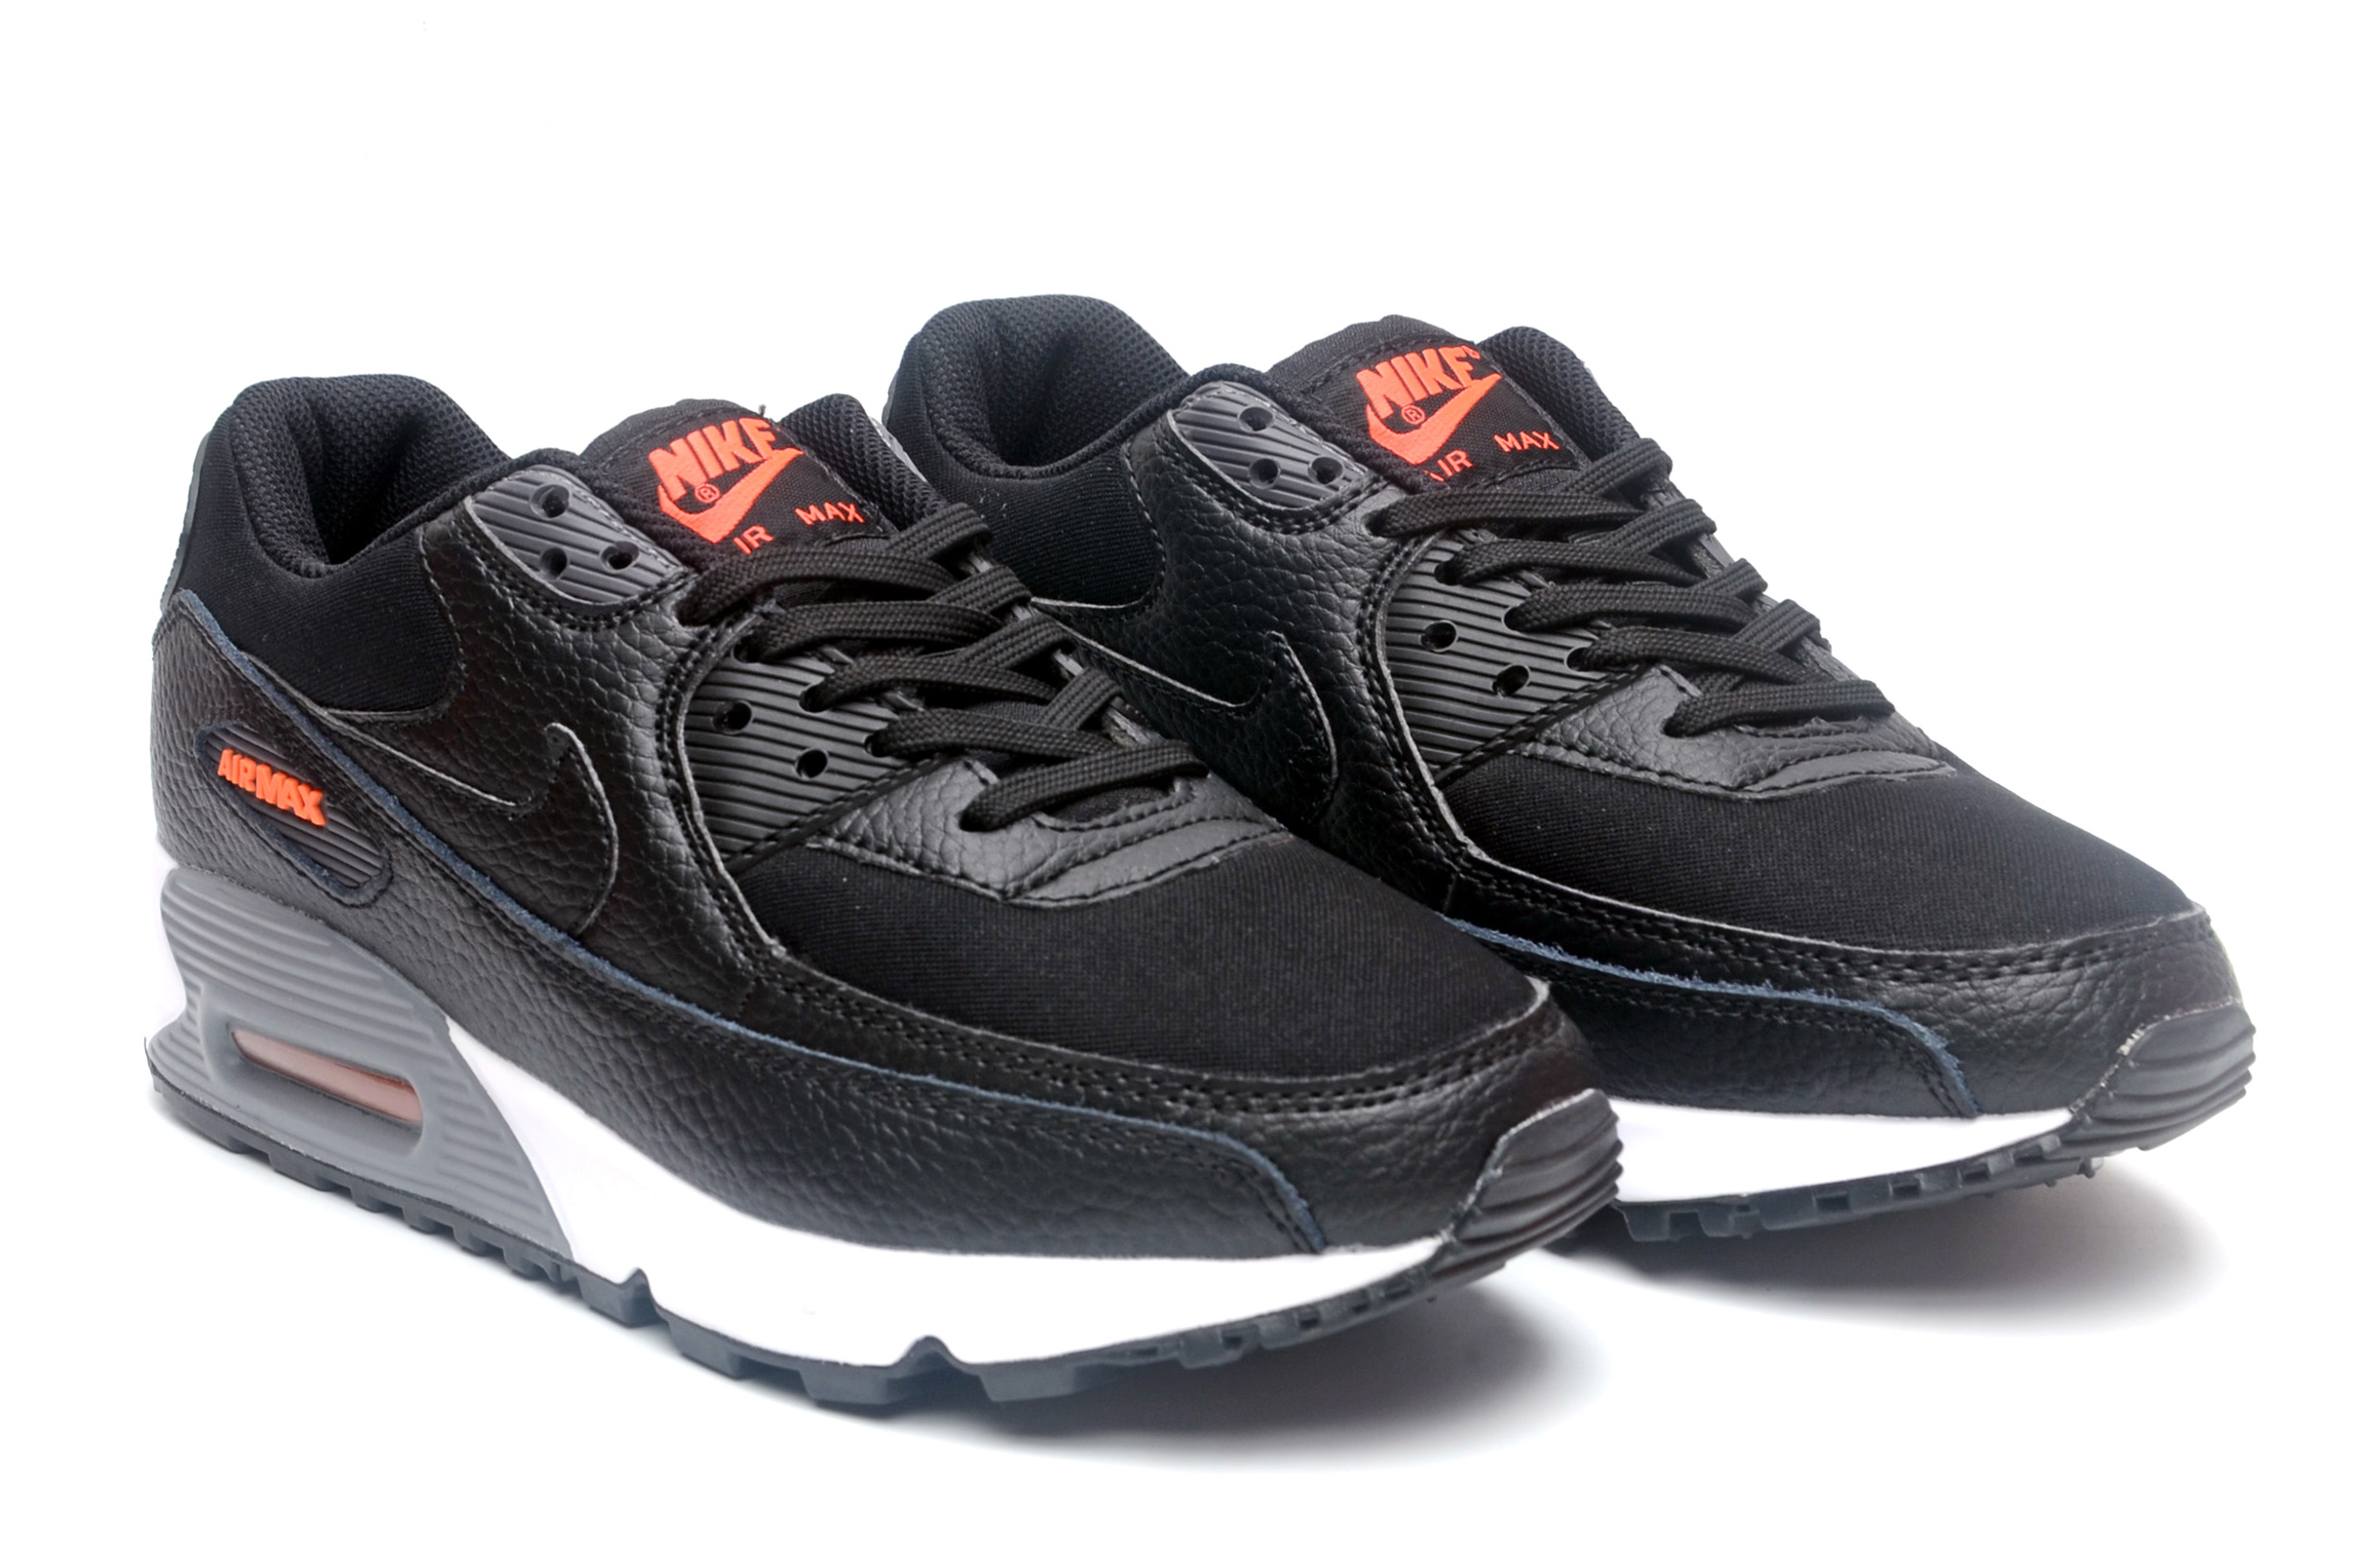 Women's Running weapon Air Max 90 Shoes 026